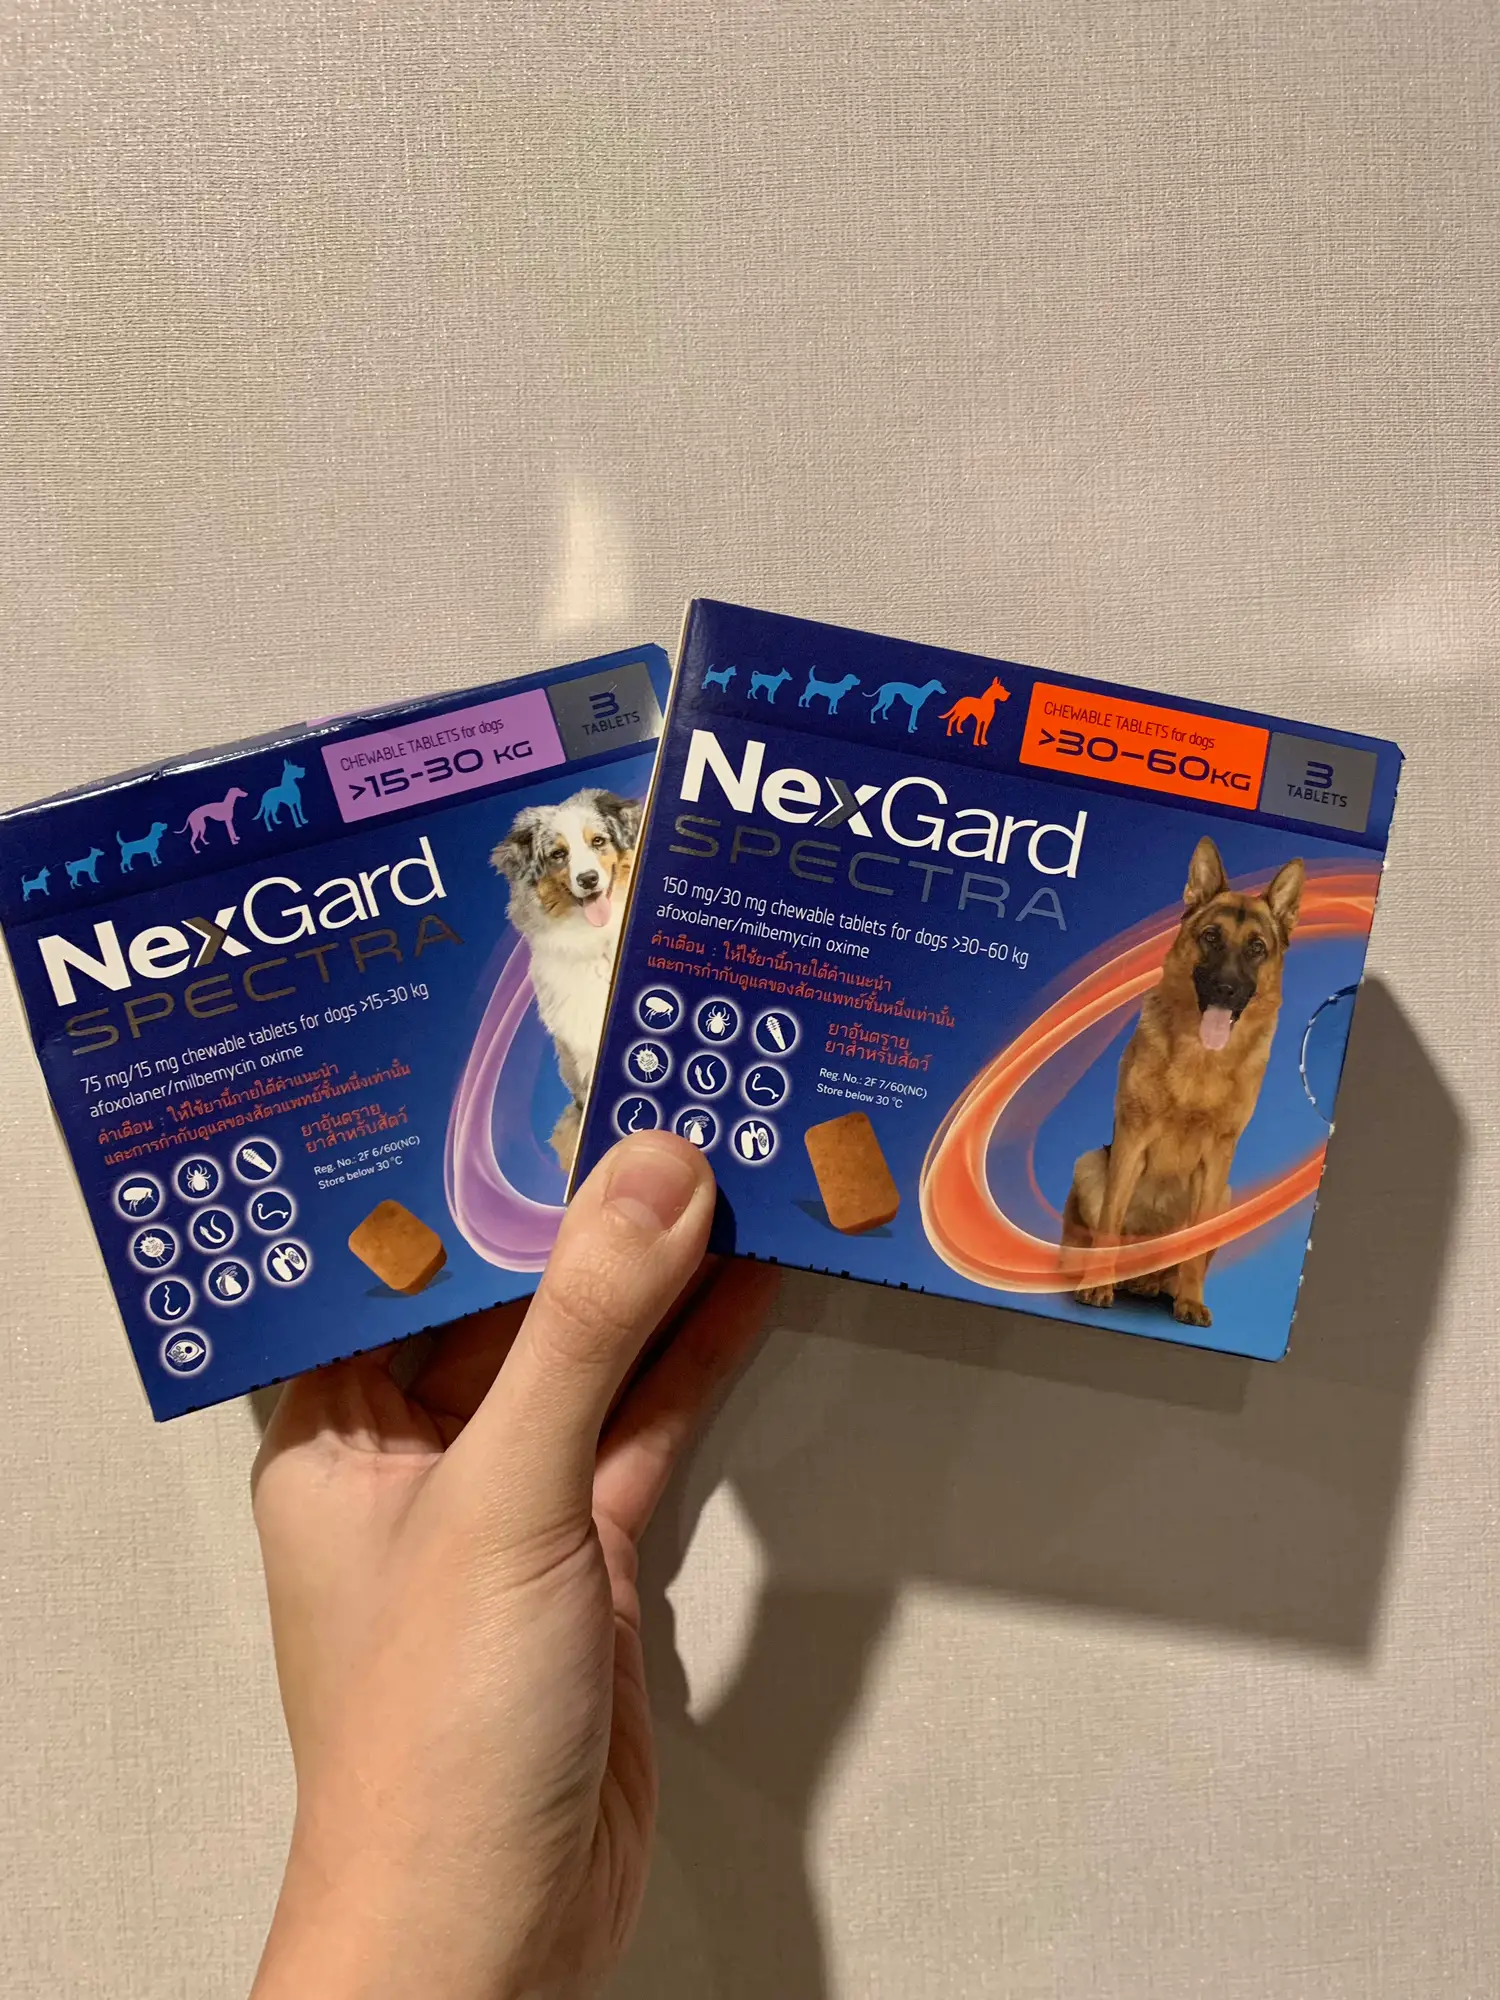 Nexgard spectra for dogs anti-tick medicine dog chewing type, Gallery  posted by พ่อหมารีวิว